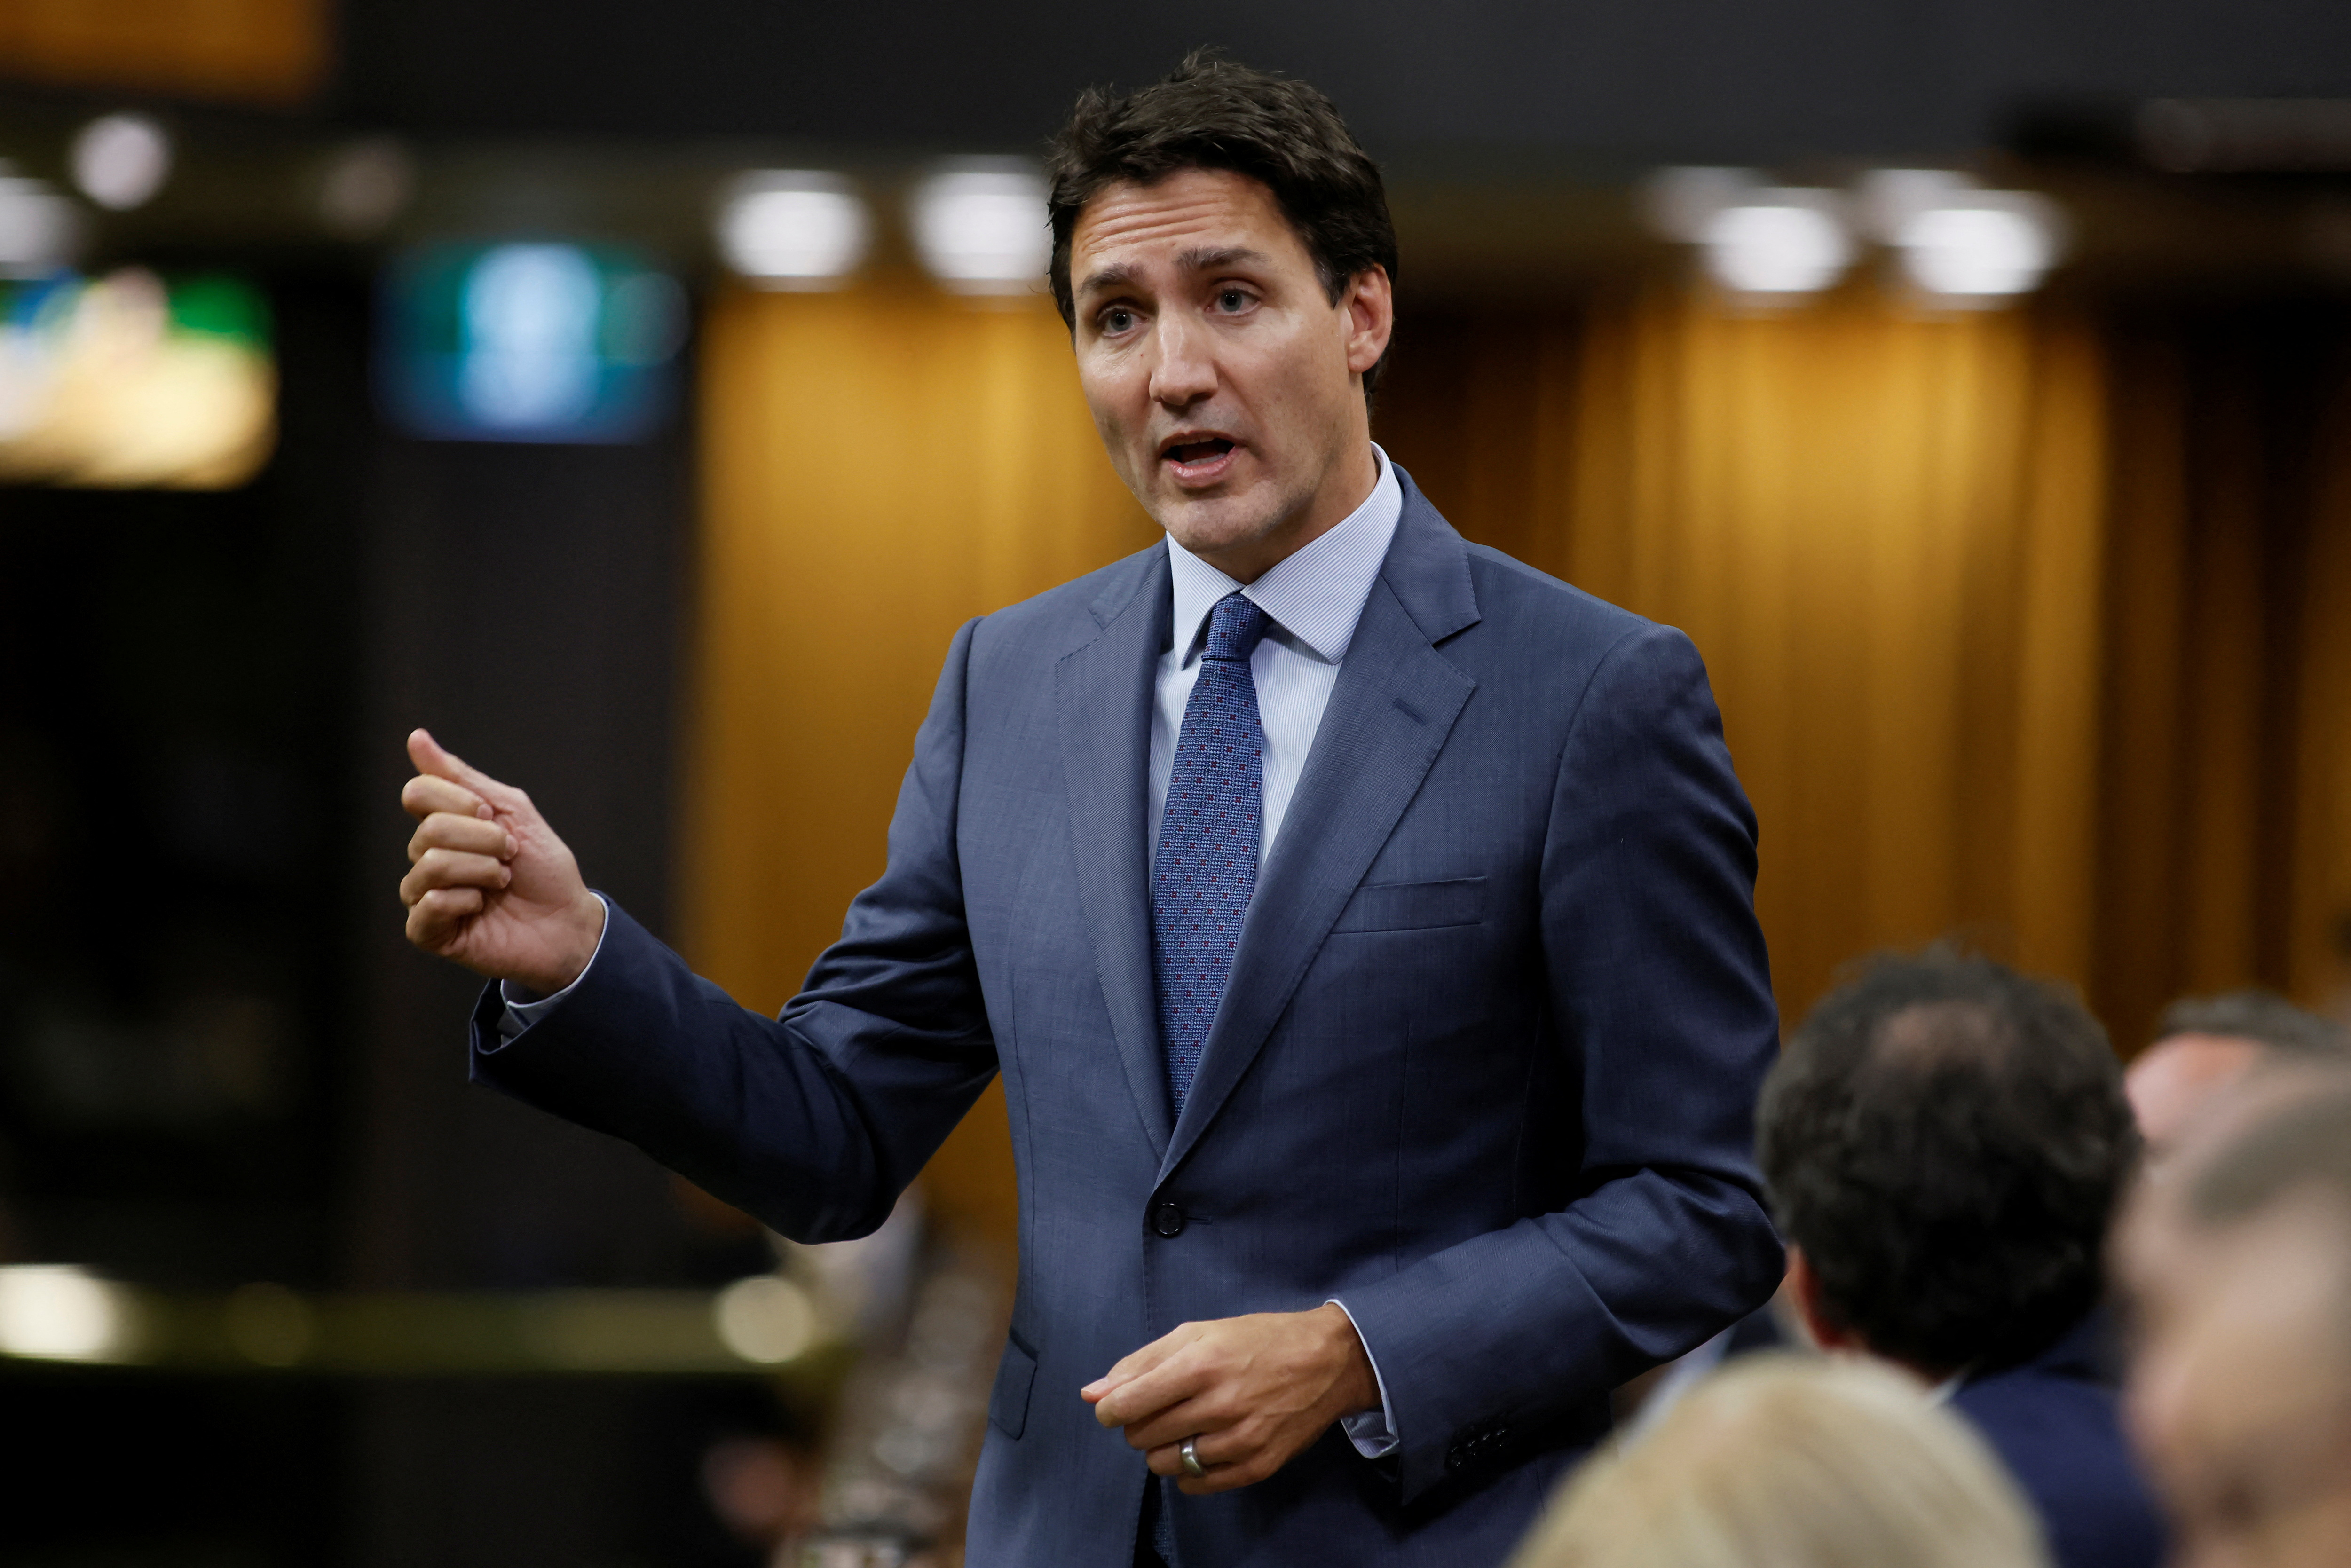 Canada's Prime Minister Justin Trudeau speaks during Question Period in the House of Commons on Parliament Hill in Ottawa